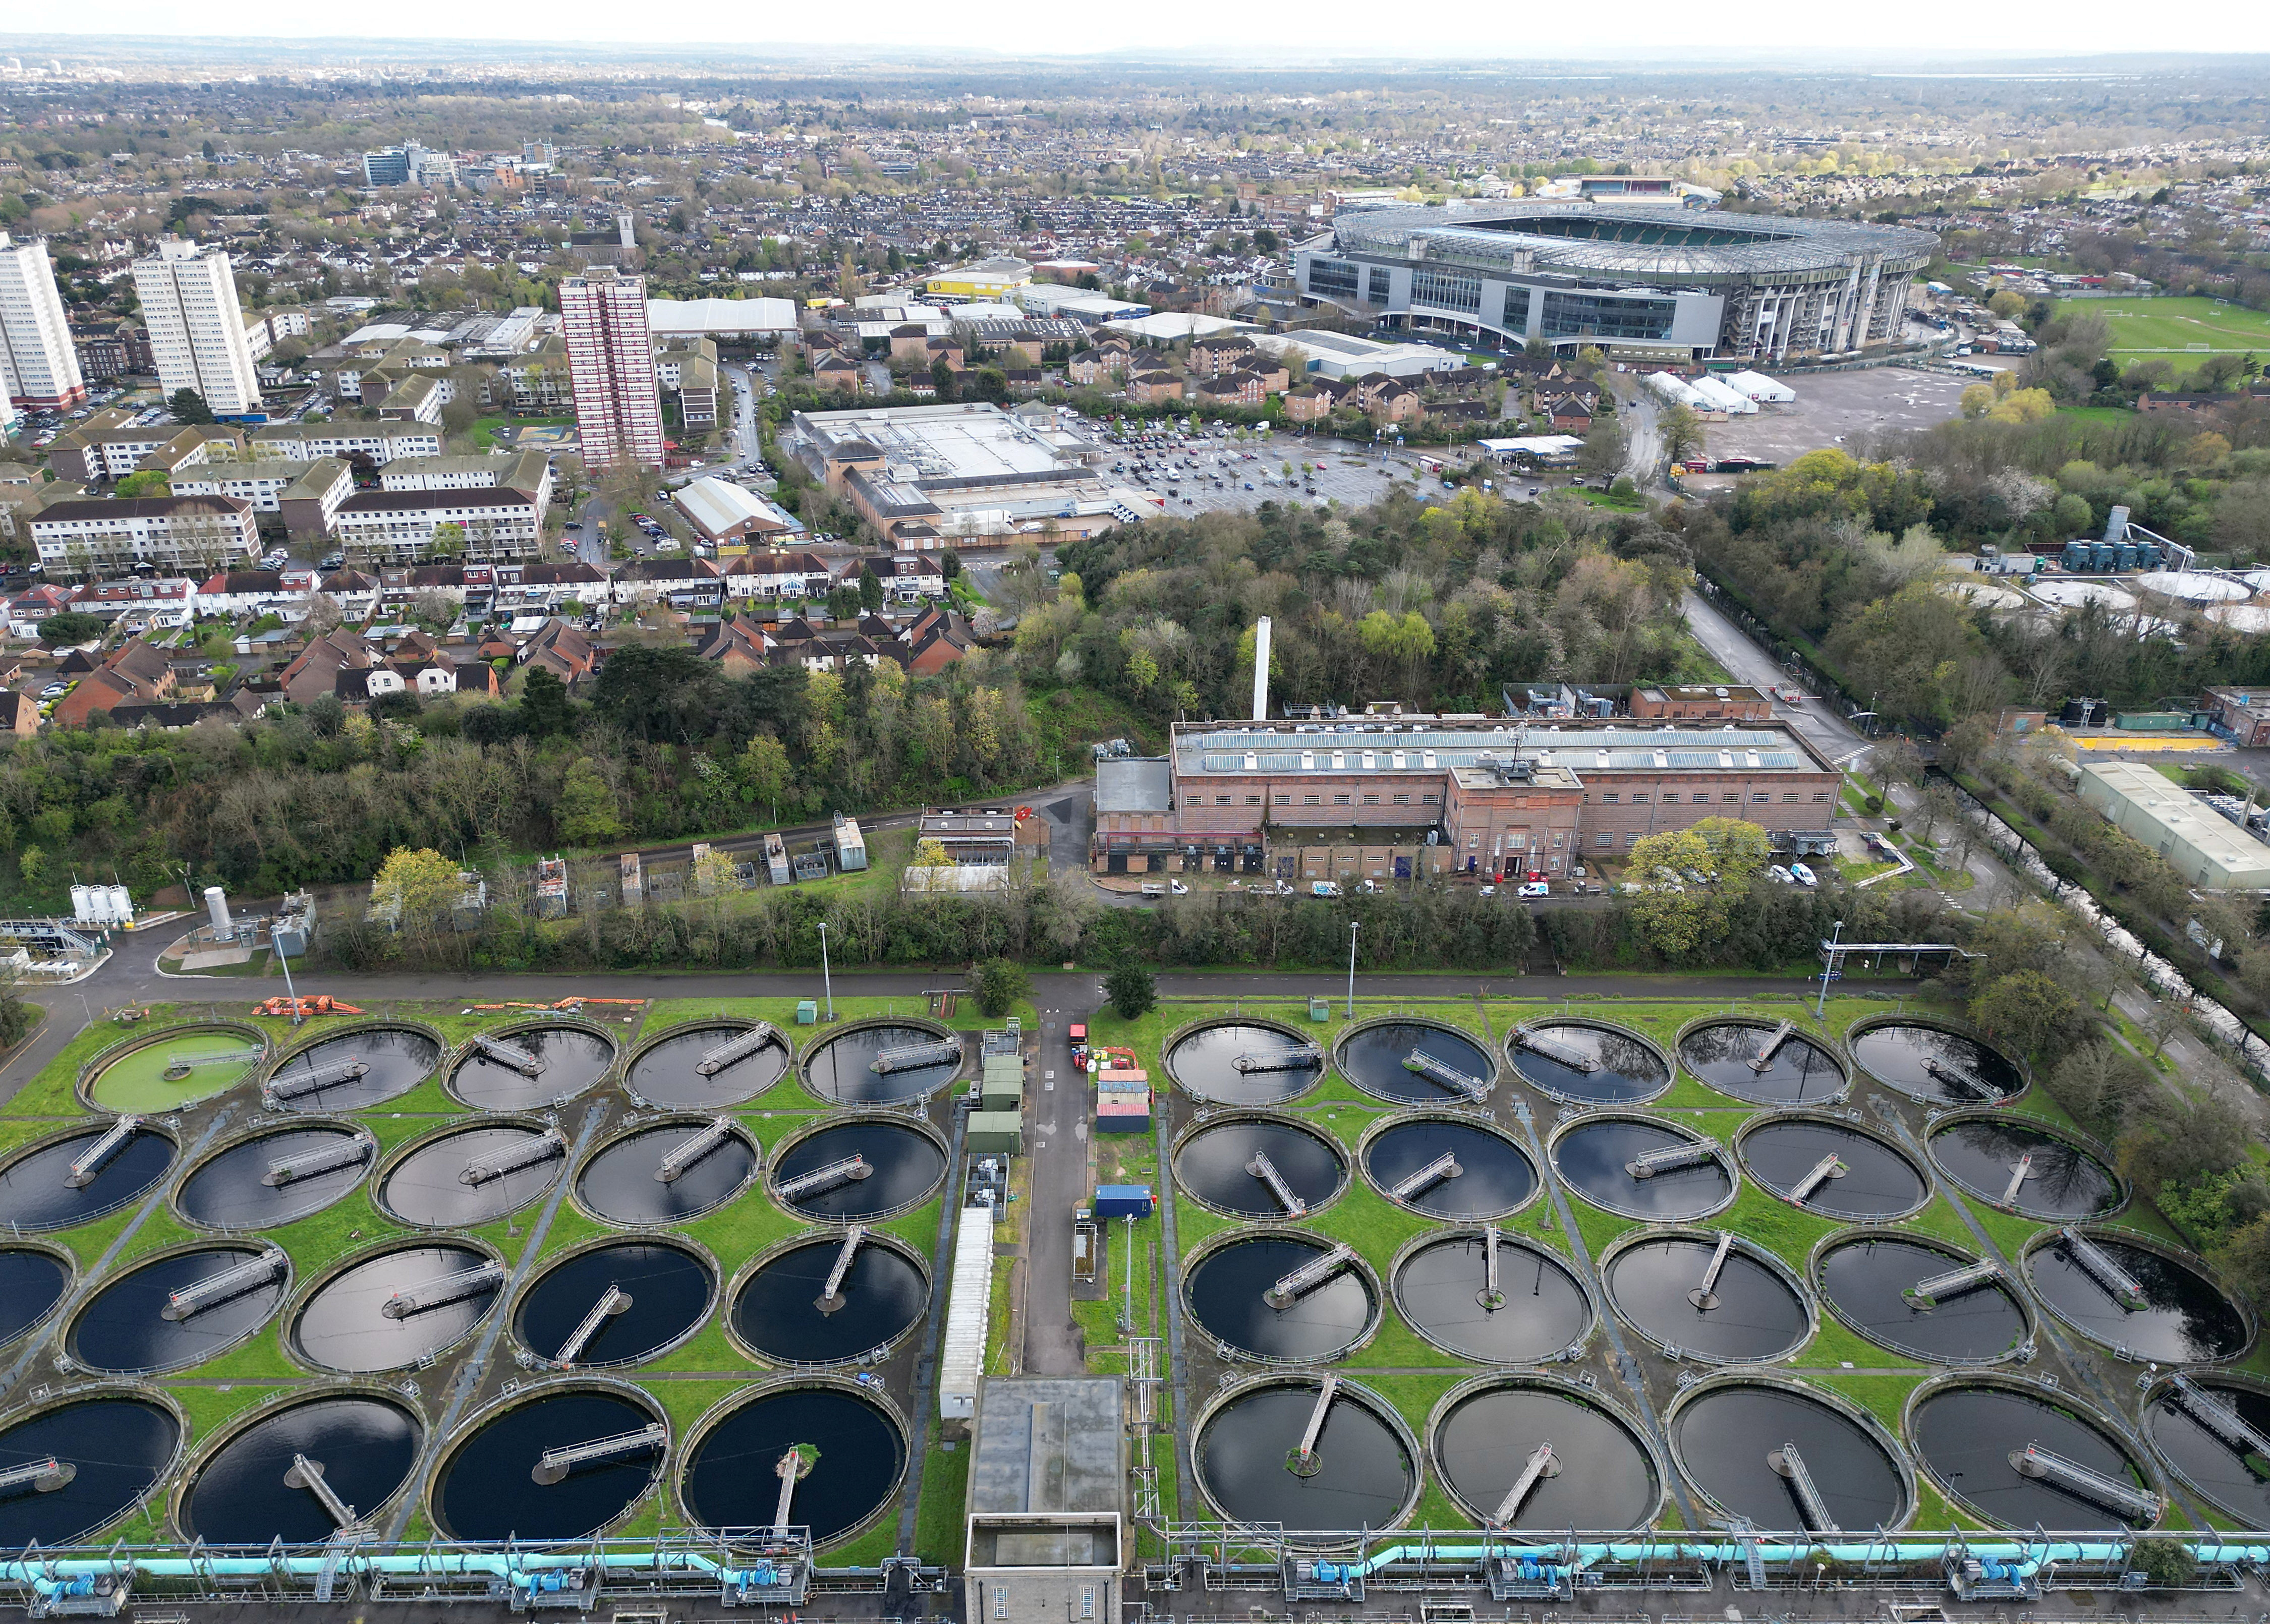 A drone view shows Mogden sewage treatment works, owned by Thames Water, in west London